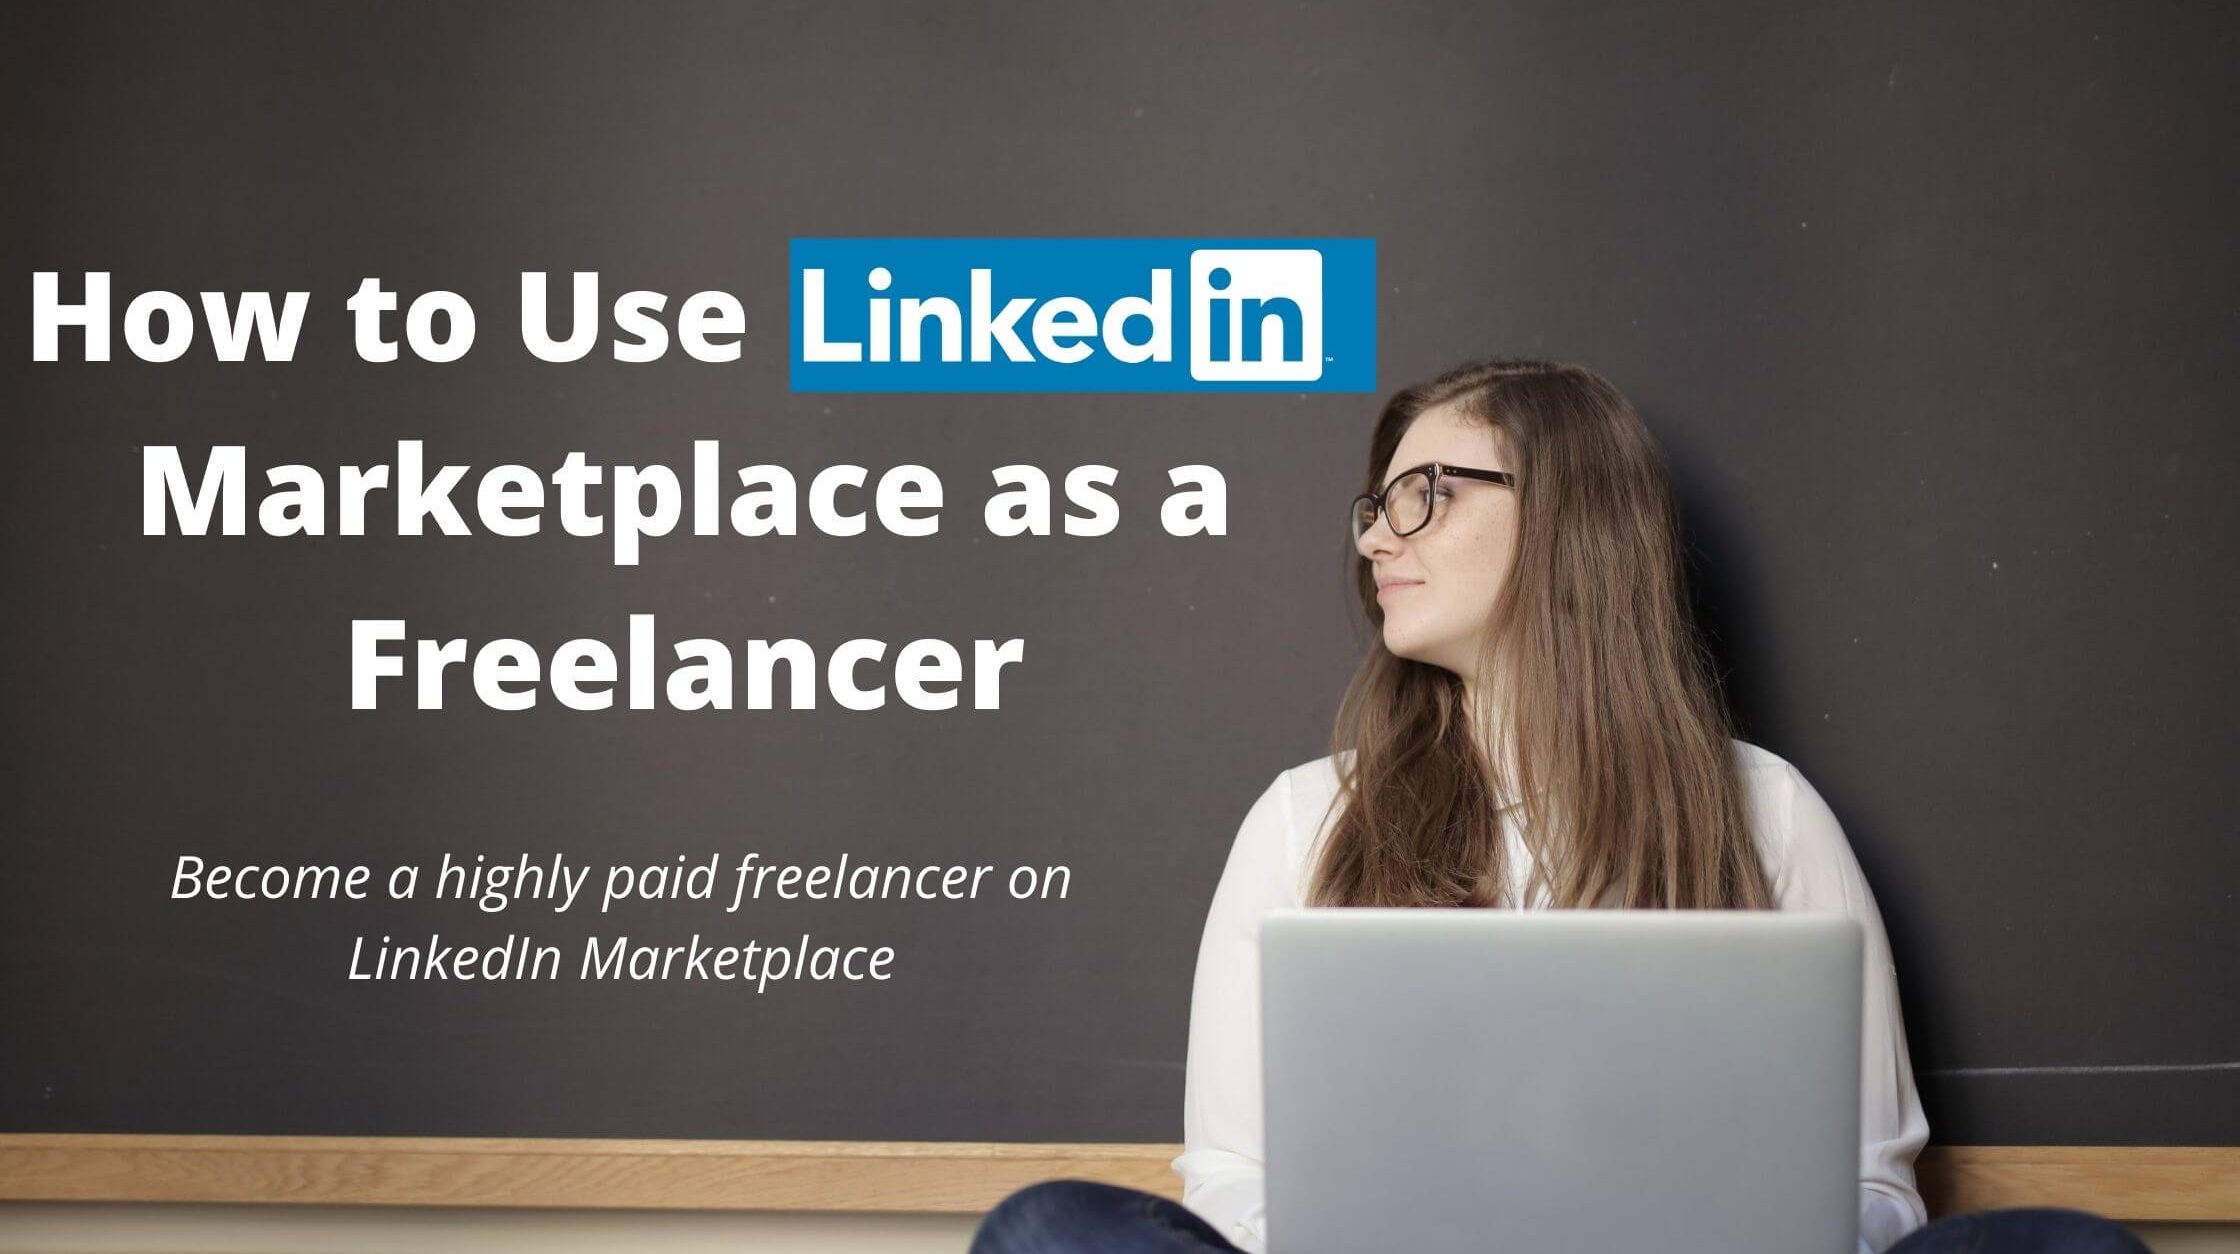 How to Use the LinkedIn Marketplace as a Freelancer